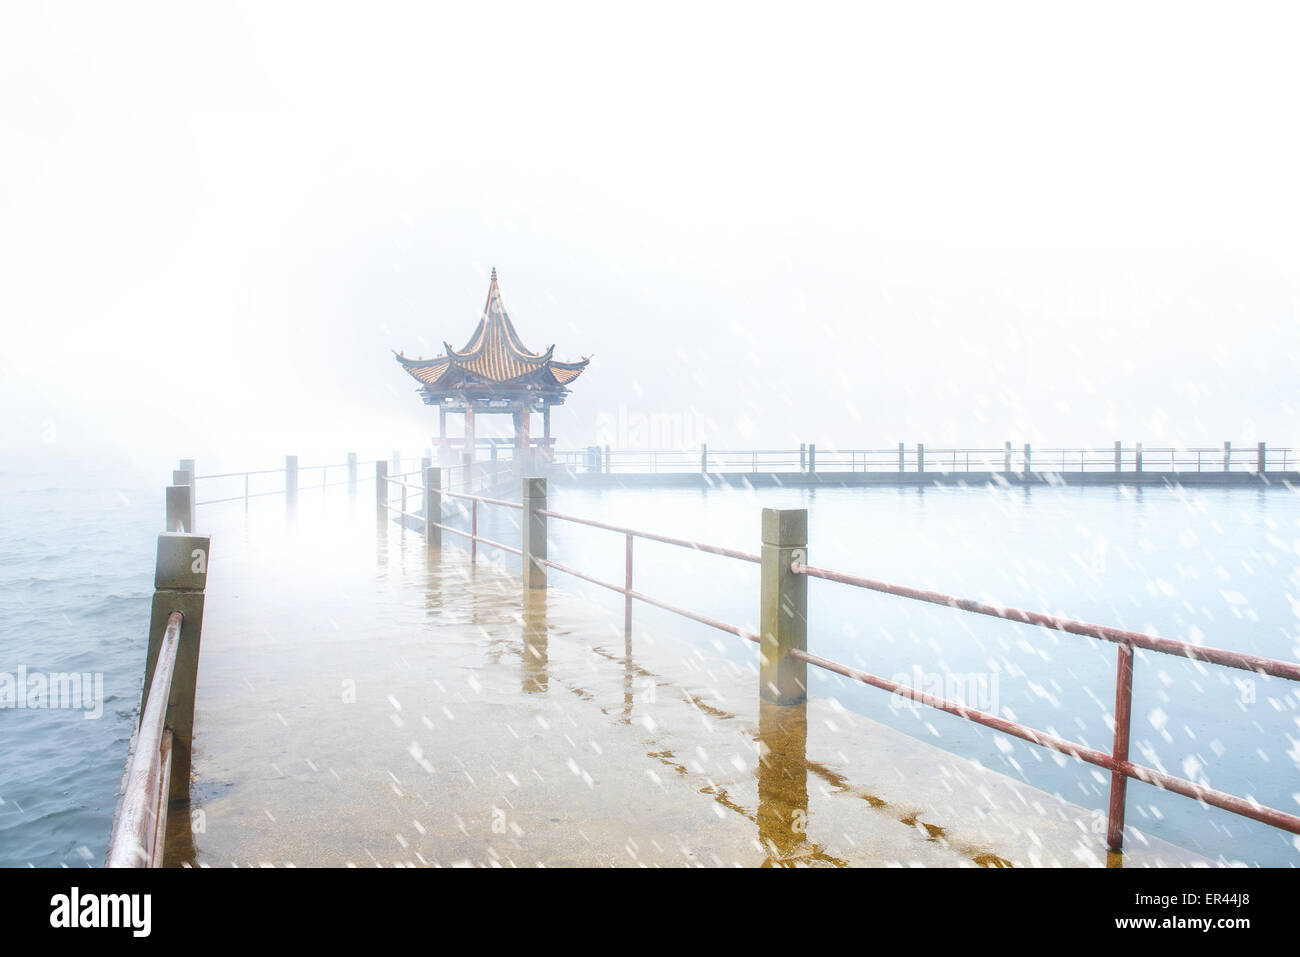 Dali, Yunnan, CHN. 10th Jan, 2015. Dali, CHINA - Jan 09 2015: (EDITORIAL USE ONLY. CHINA OUT) ï¼ˆPhoto has been processedï¼‰Erhai Lake in the rain. Erhai Lake is the largest highland lake next to Dianchi and one of the seven biggest fresh water lakes in China. ''Erhai'' means ''sea shaped like an ear'' in Chinese. Implying that the lake is ear shaped and as large as a sea, it was so named. The lake covers an area of 250 square kilometers and is located about 2 kilometers east of Dali. It is like a crescent lying between Cangshan and Dali city as seen from Cangshan Mount. In a sunny day, the c Stock Photo